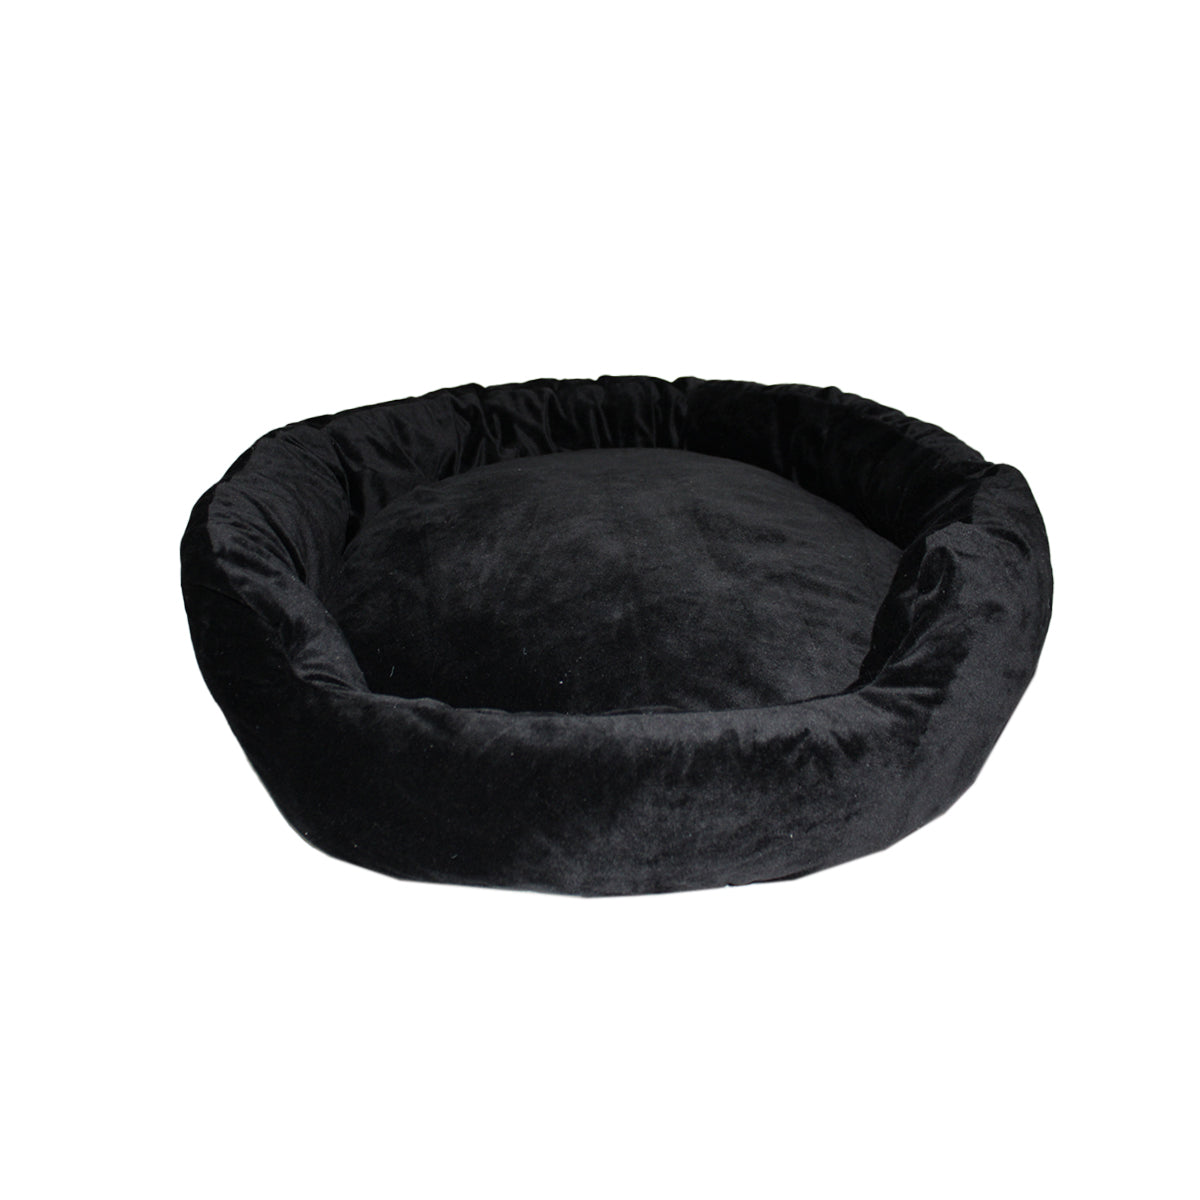 ROUND BED WITH REMOVABLE CUSHION MEDIUM 9647 